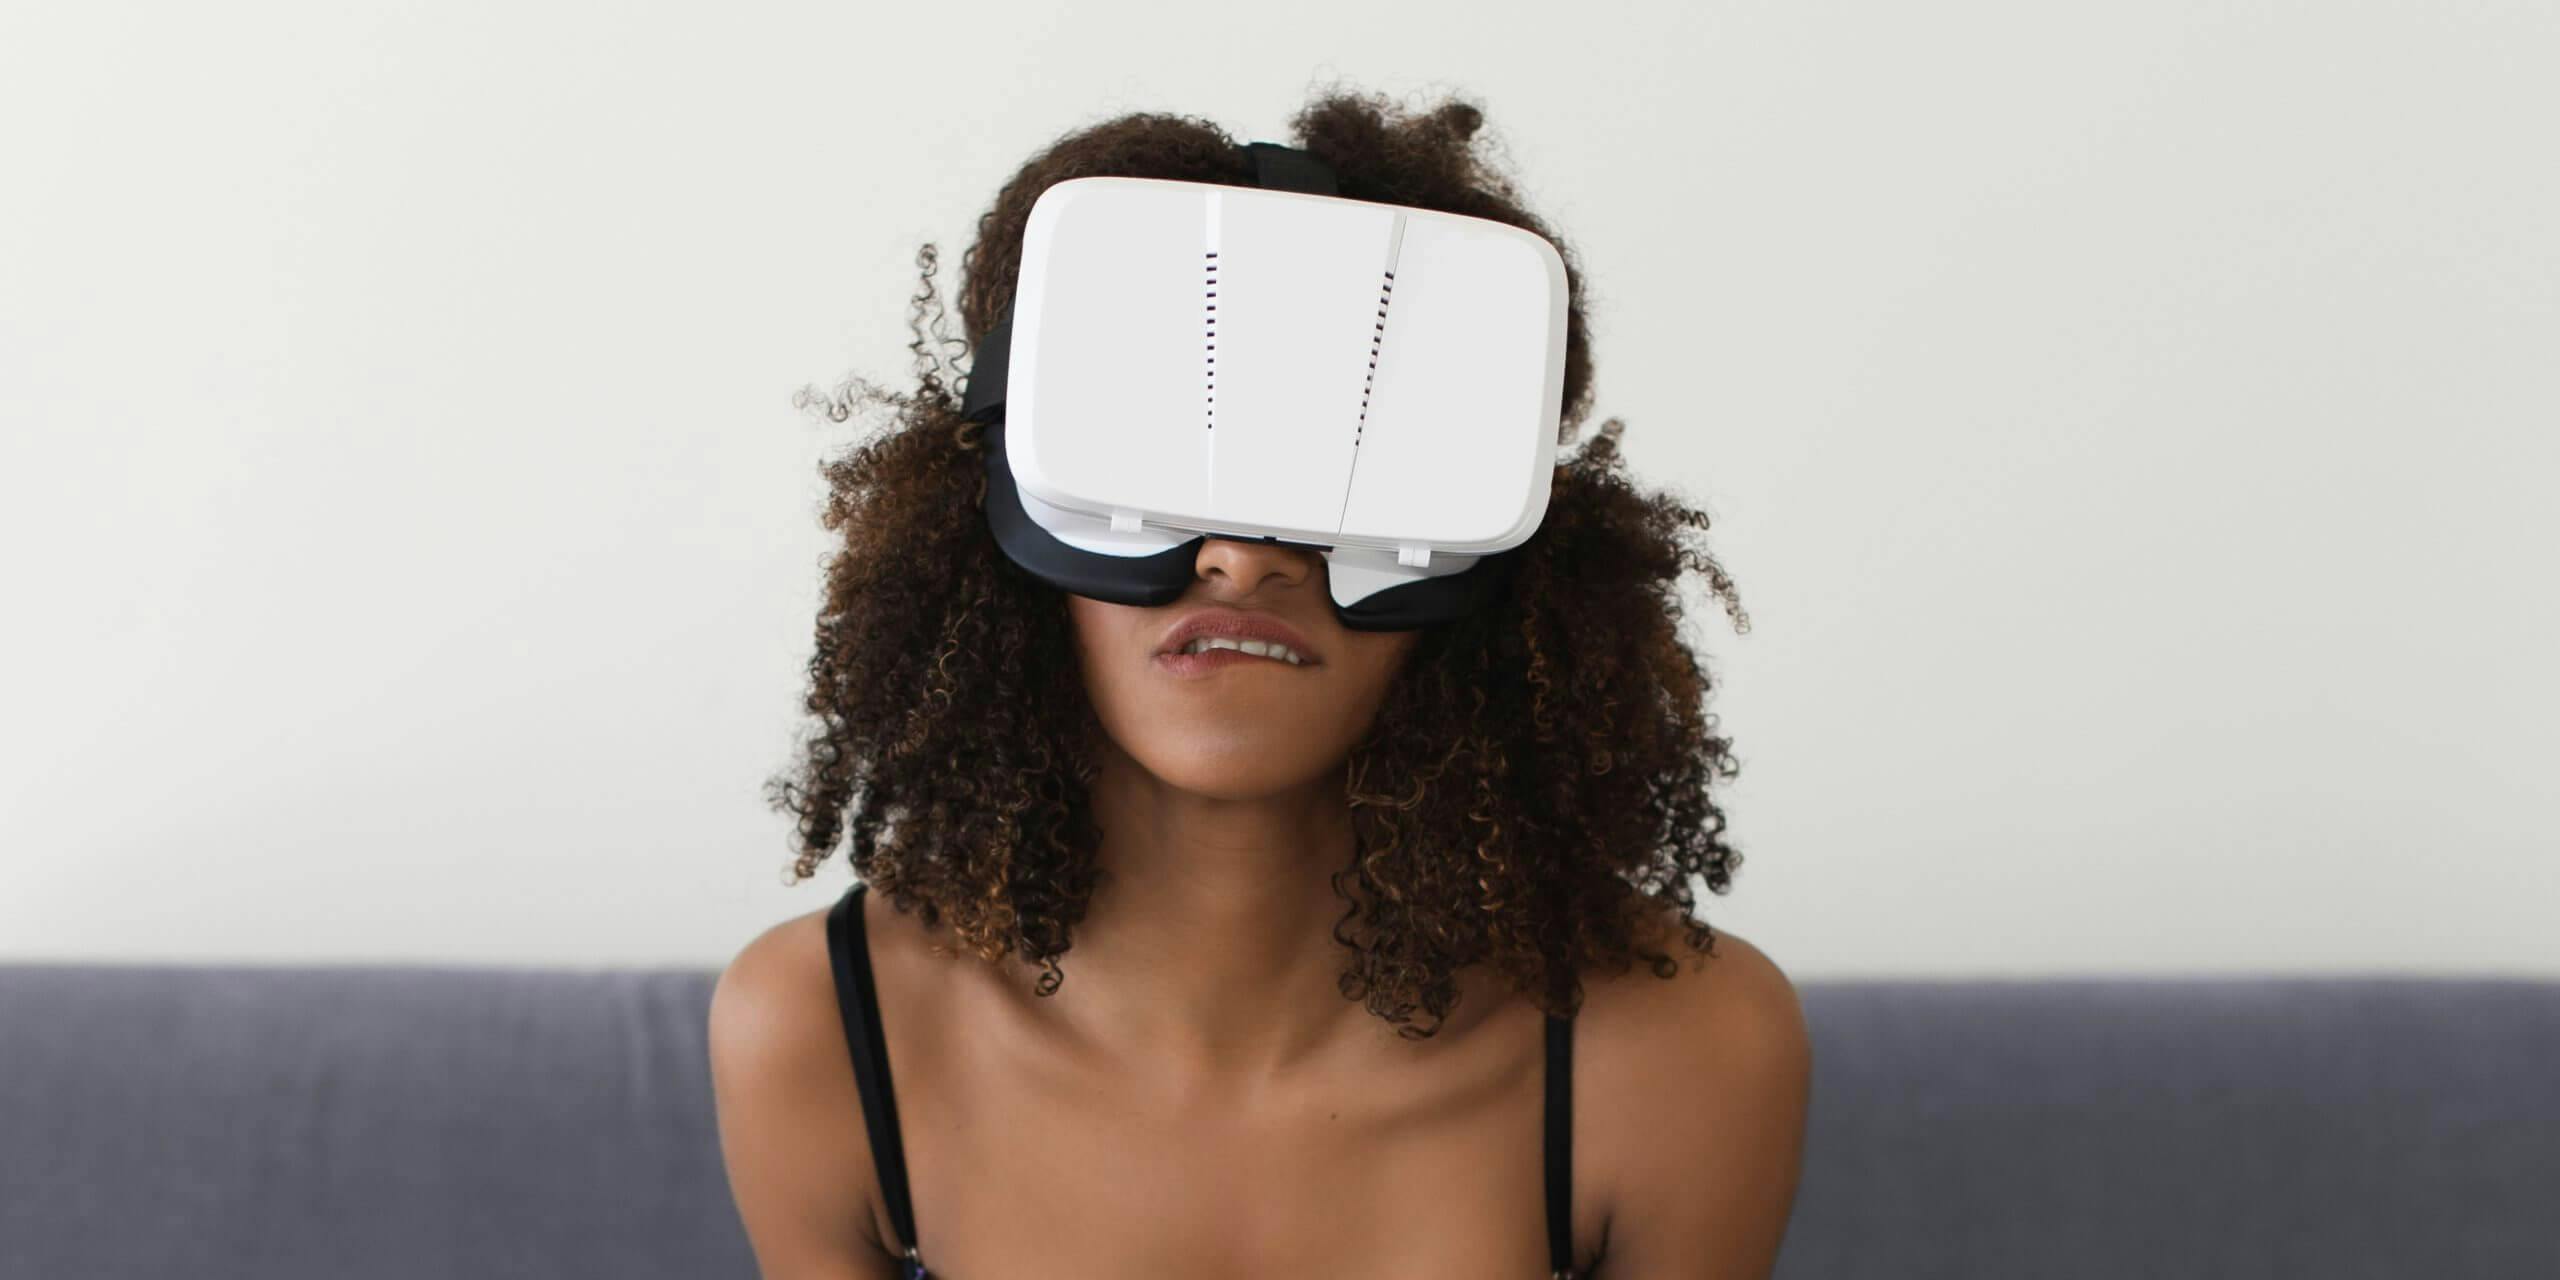 Virtual Reality Girl Porn - Free VR Porn Games: The Best Free VR Porn Games and Sites